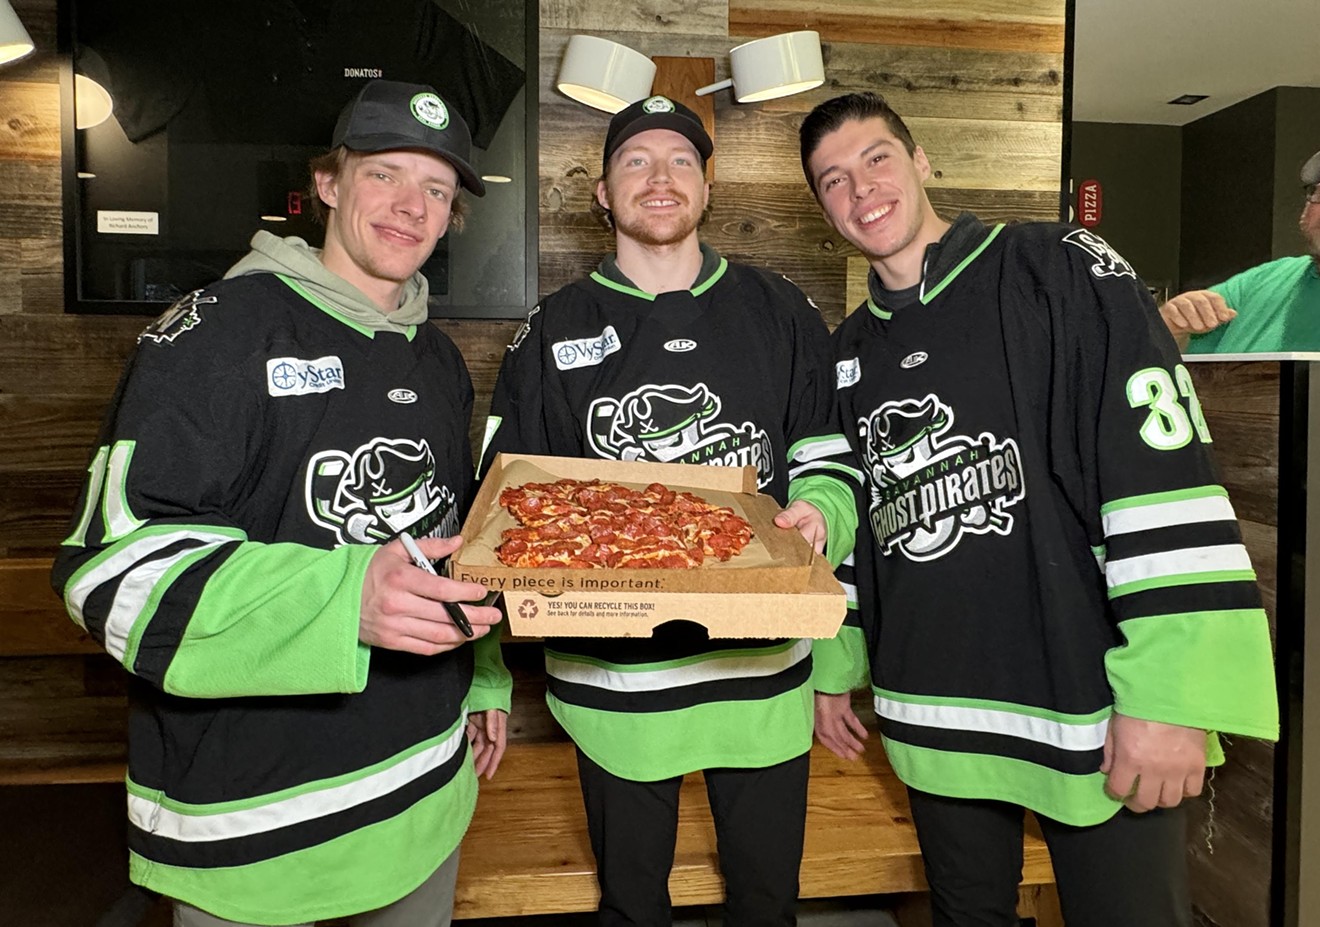 DONATOS Pizza Welcomes Ghost Pirates Players